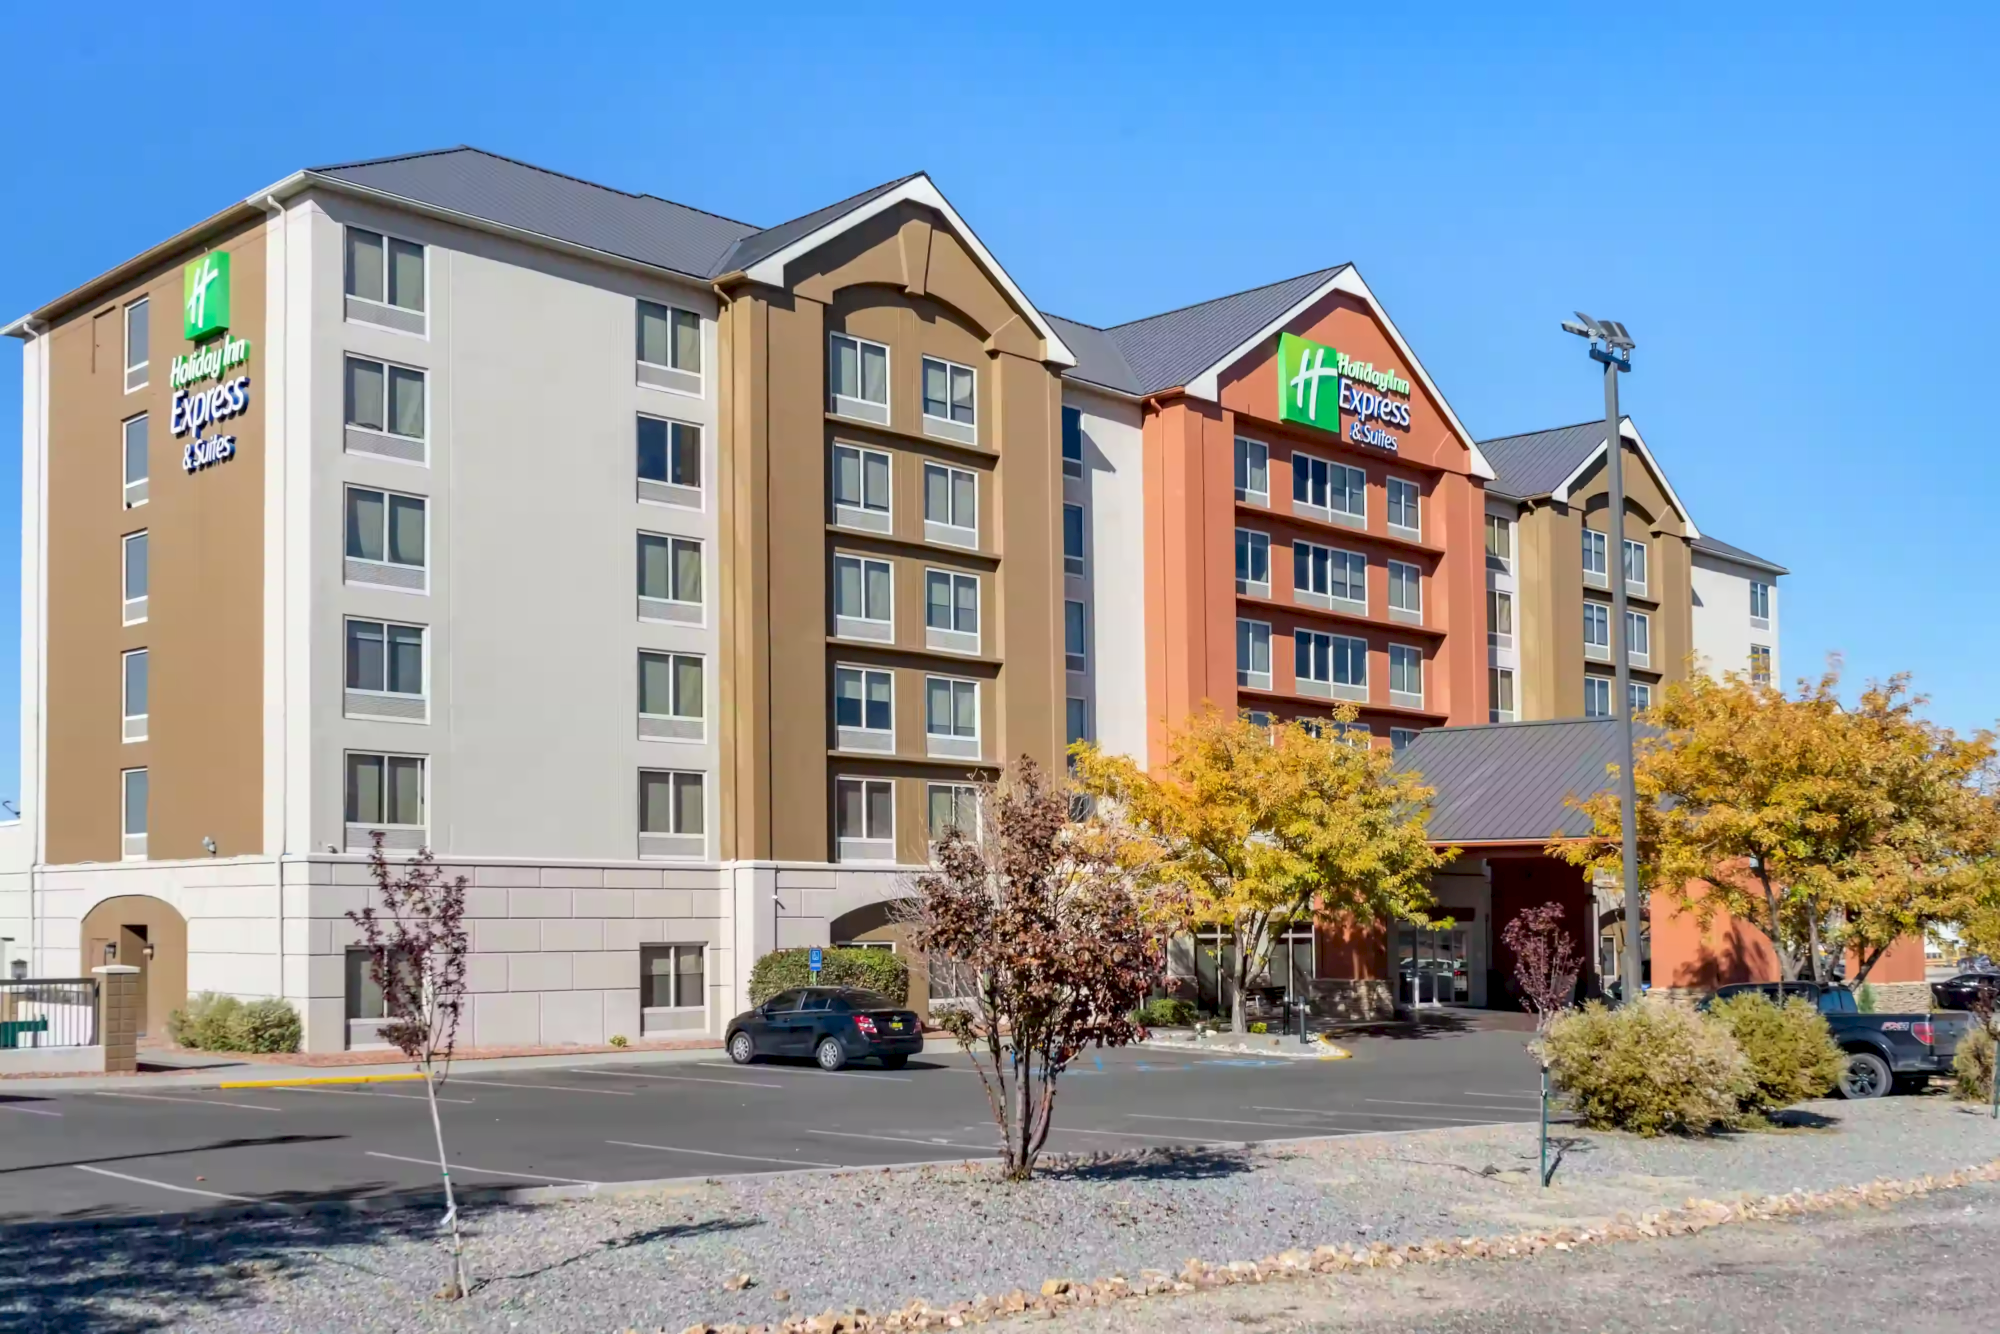 This image shows a multi-story Holiday Inn Express hotel with a parking lot and some autumn-colored trees in front of the building.